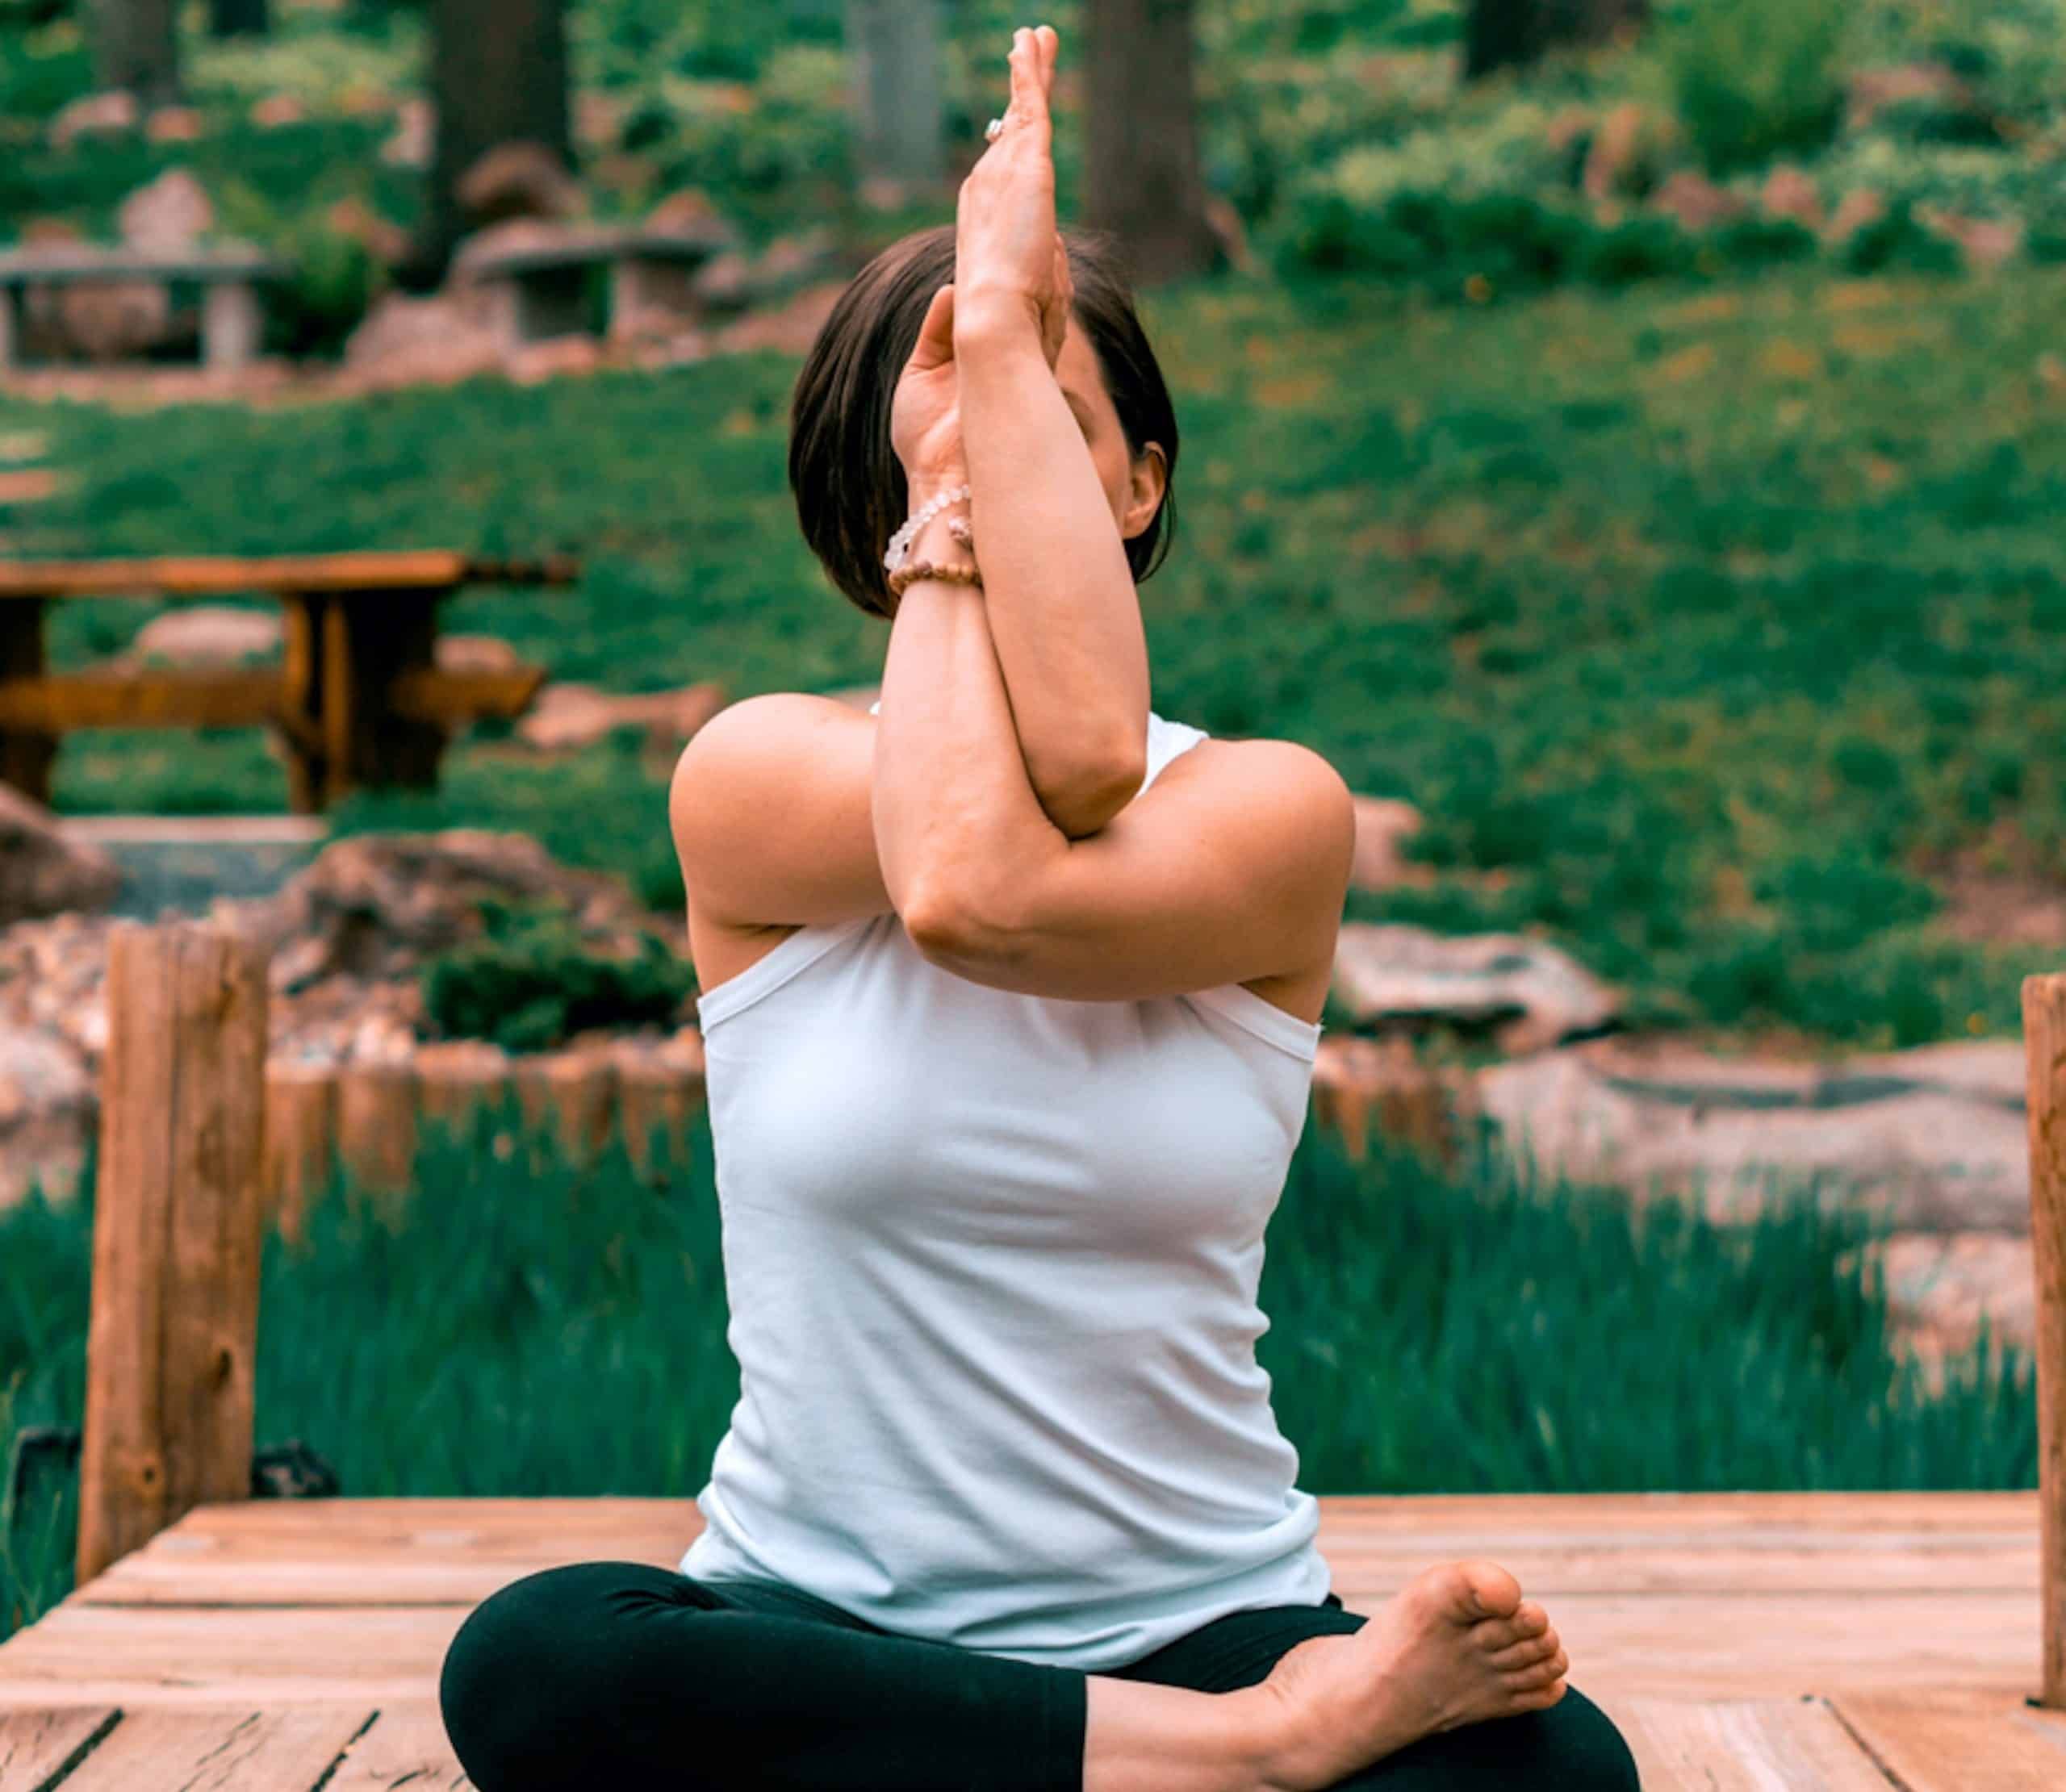 How CBD Oil Can Change Your Yoga Practice